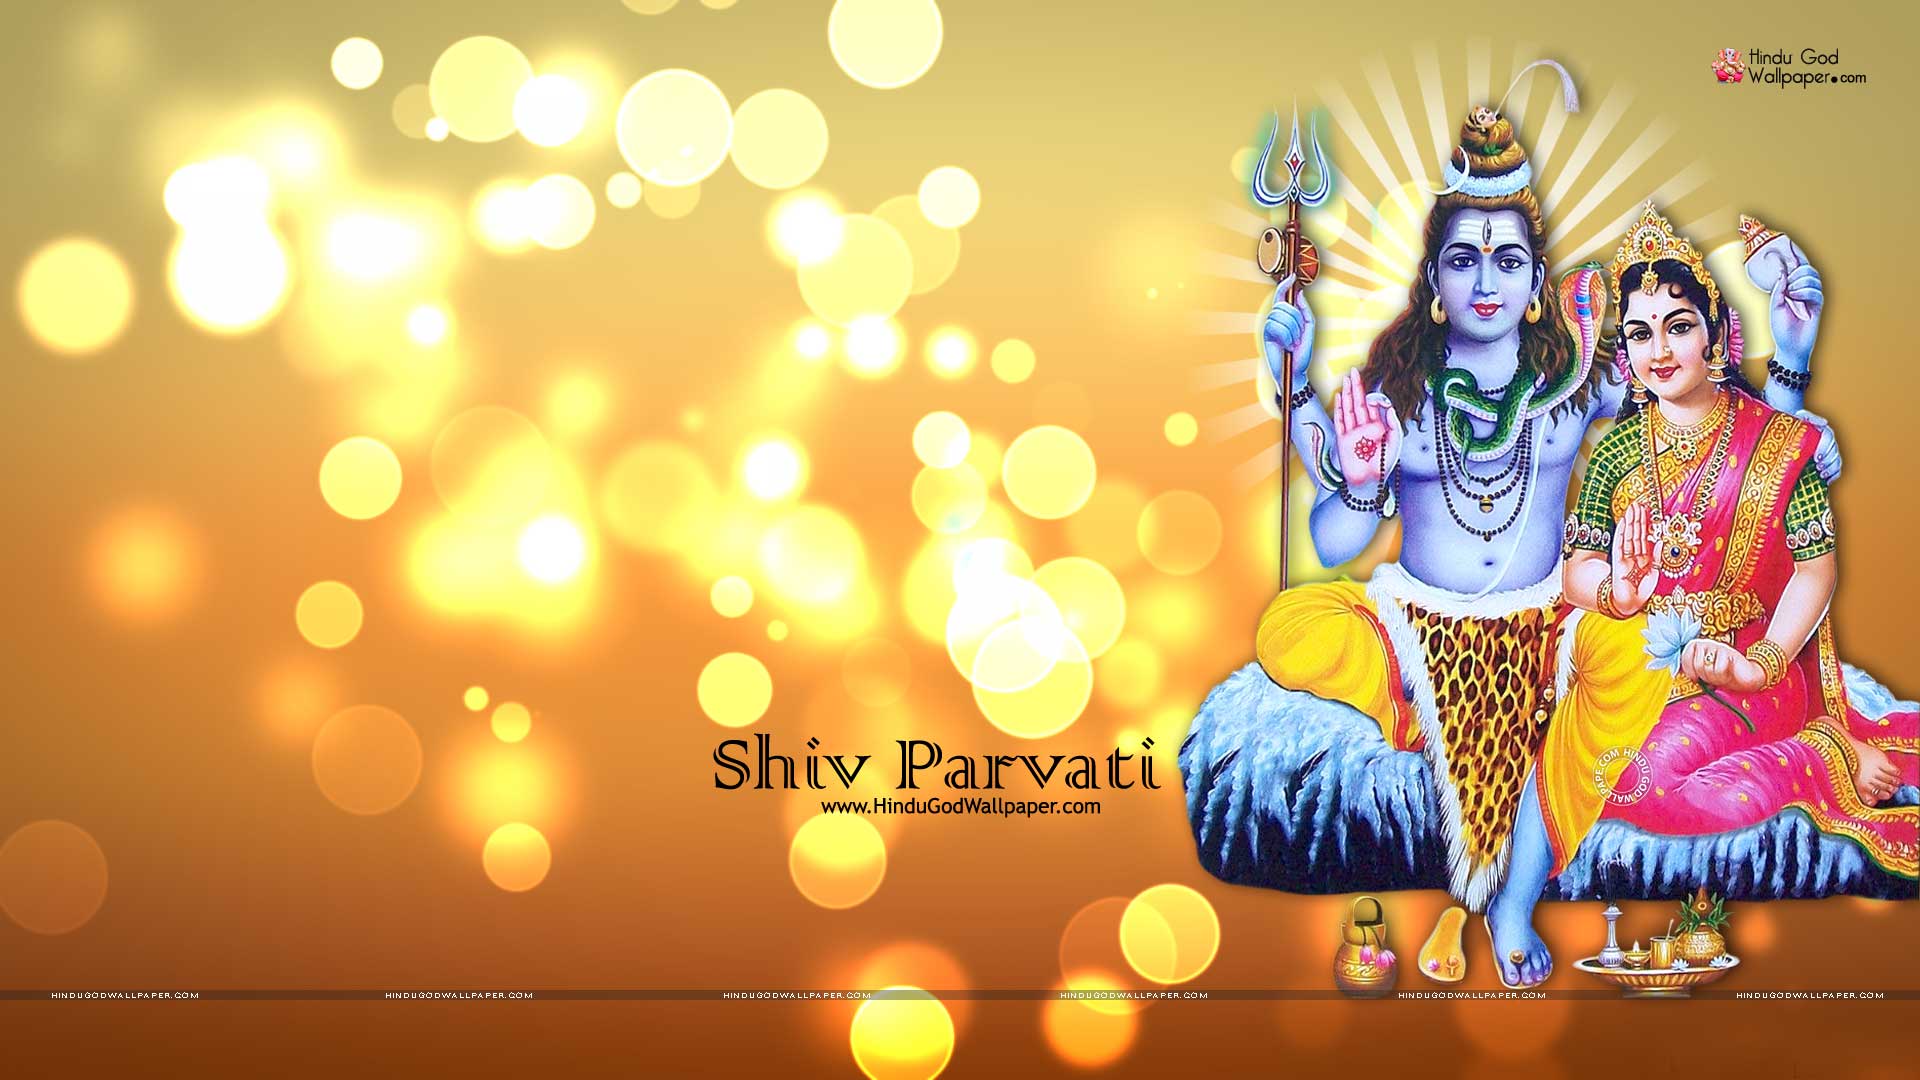 Shiva Parvati Wallpapers HD Full Size Photos Images Free Download